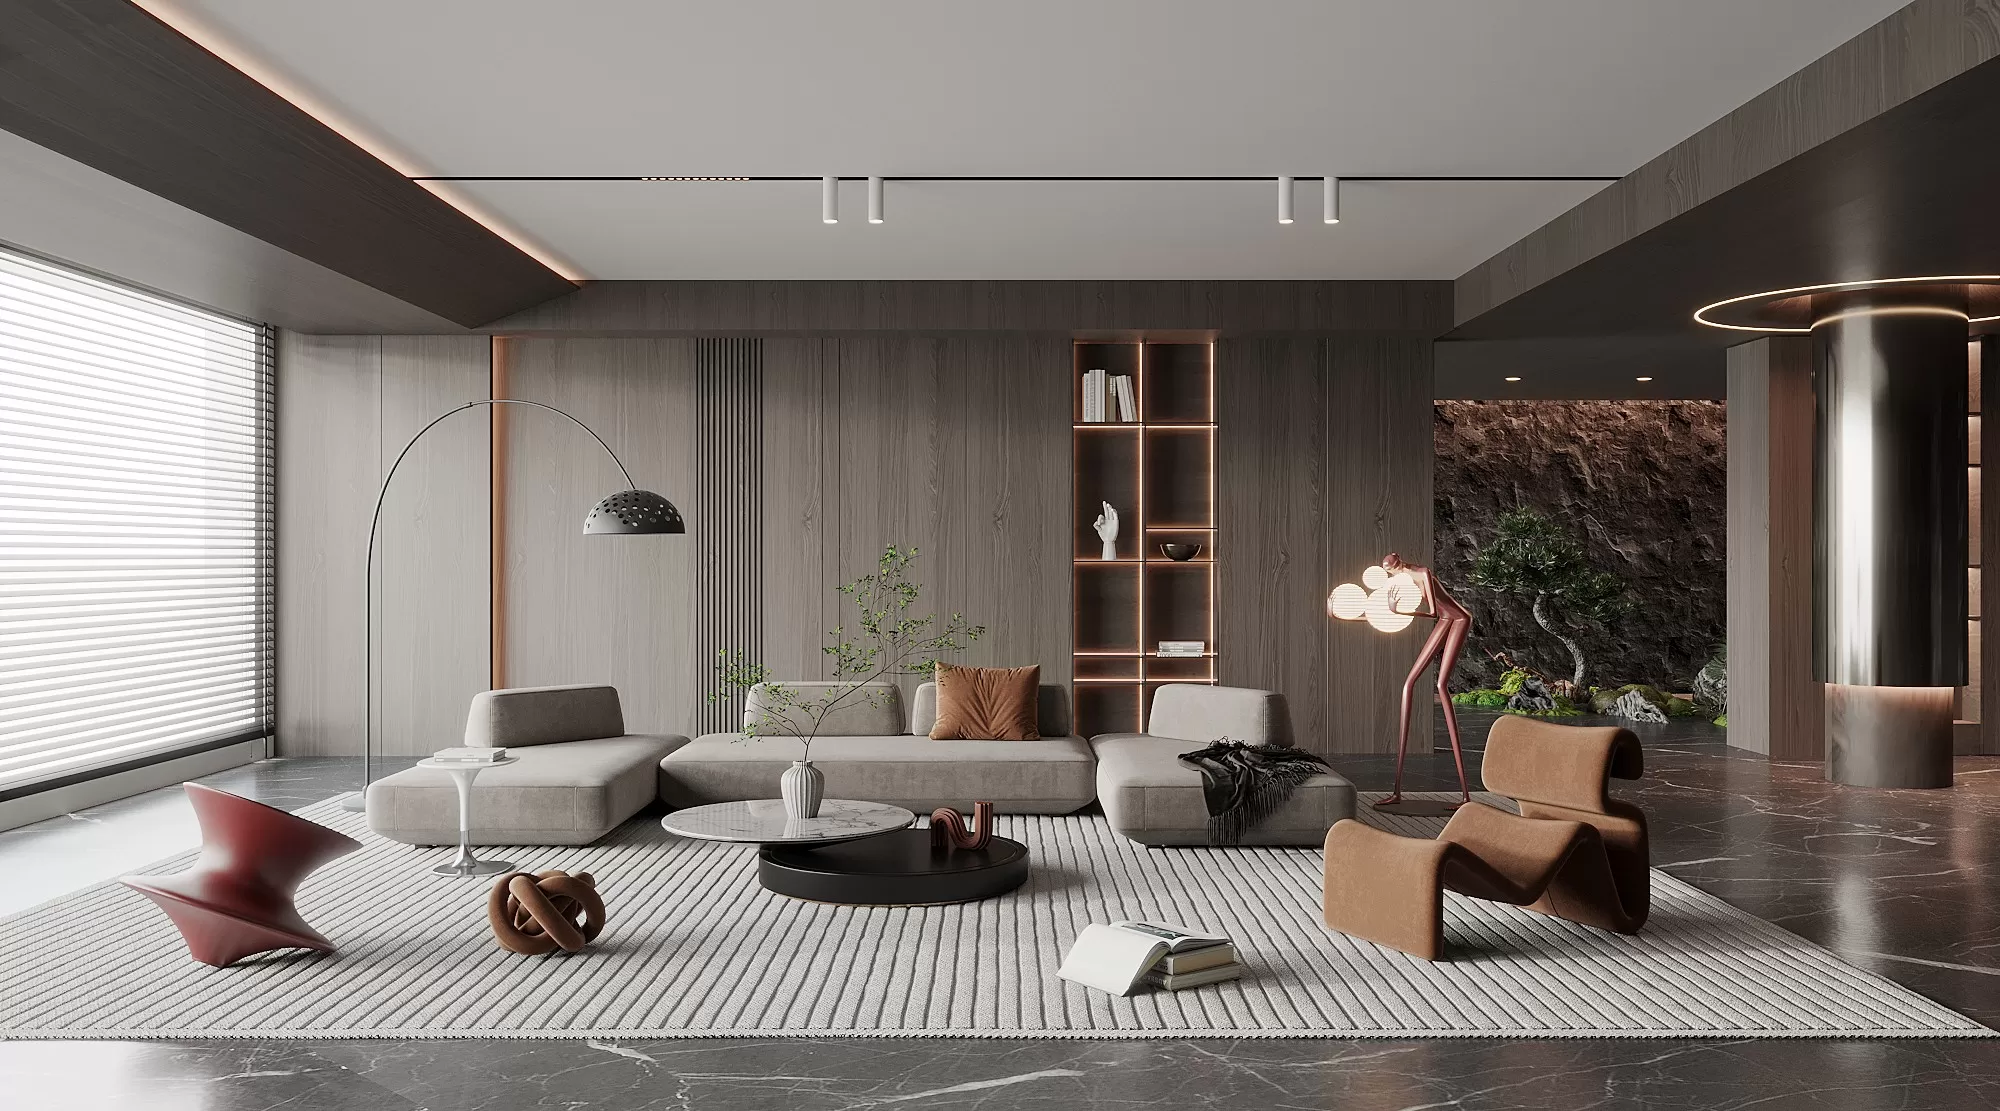 HOUSE SPACE 3D SCENES – LIVING ROOM – 0051